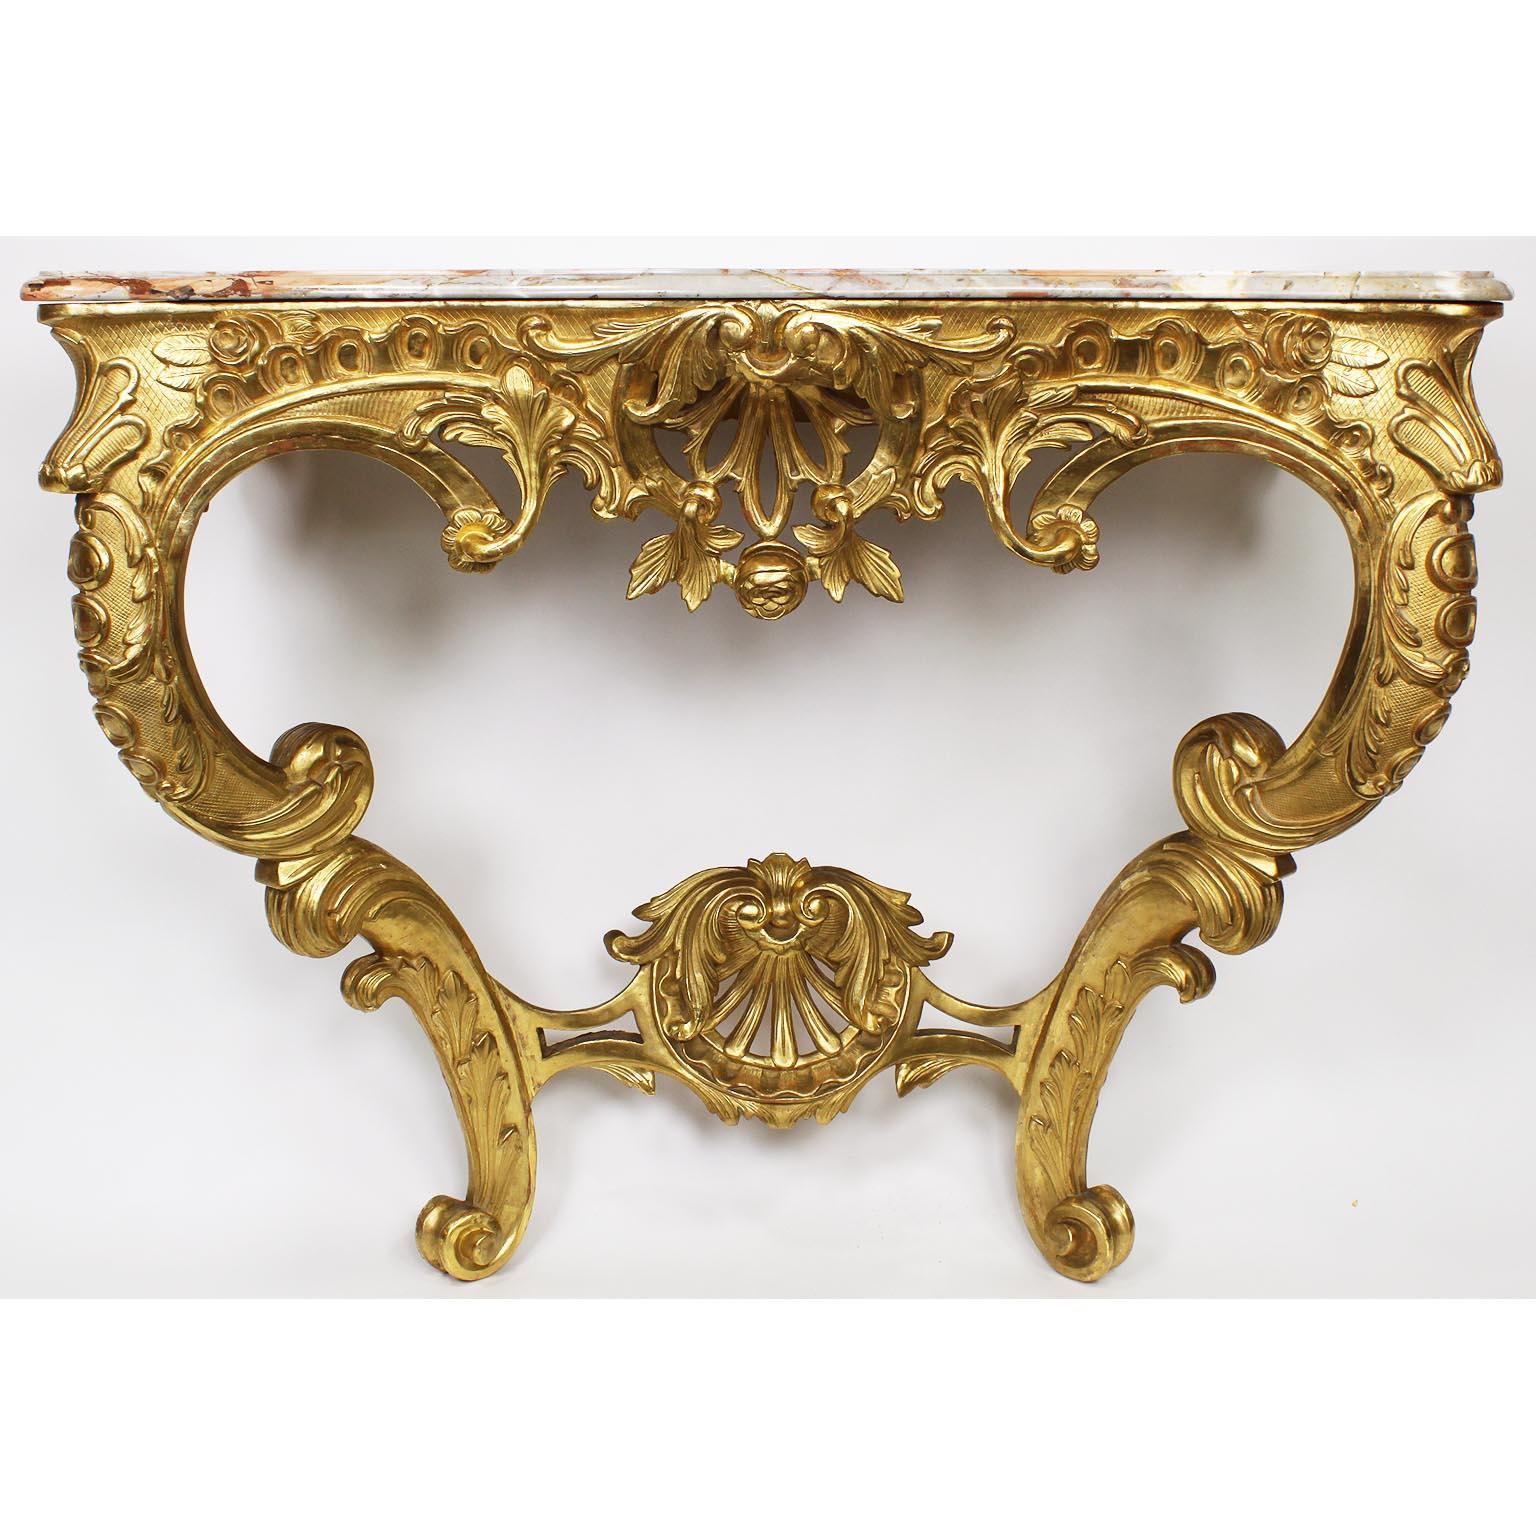 A fine French 19th century Louis XV style giltwood and Gesso carved wall-mounting console table with marble top. The ornately carved apron with scrolls, acanthus, shells and floral designs, raised on twin cabriolet legs conjoined with a carved shell